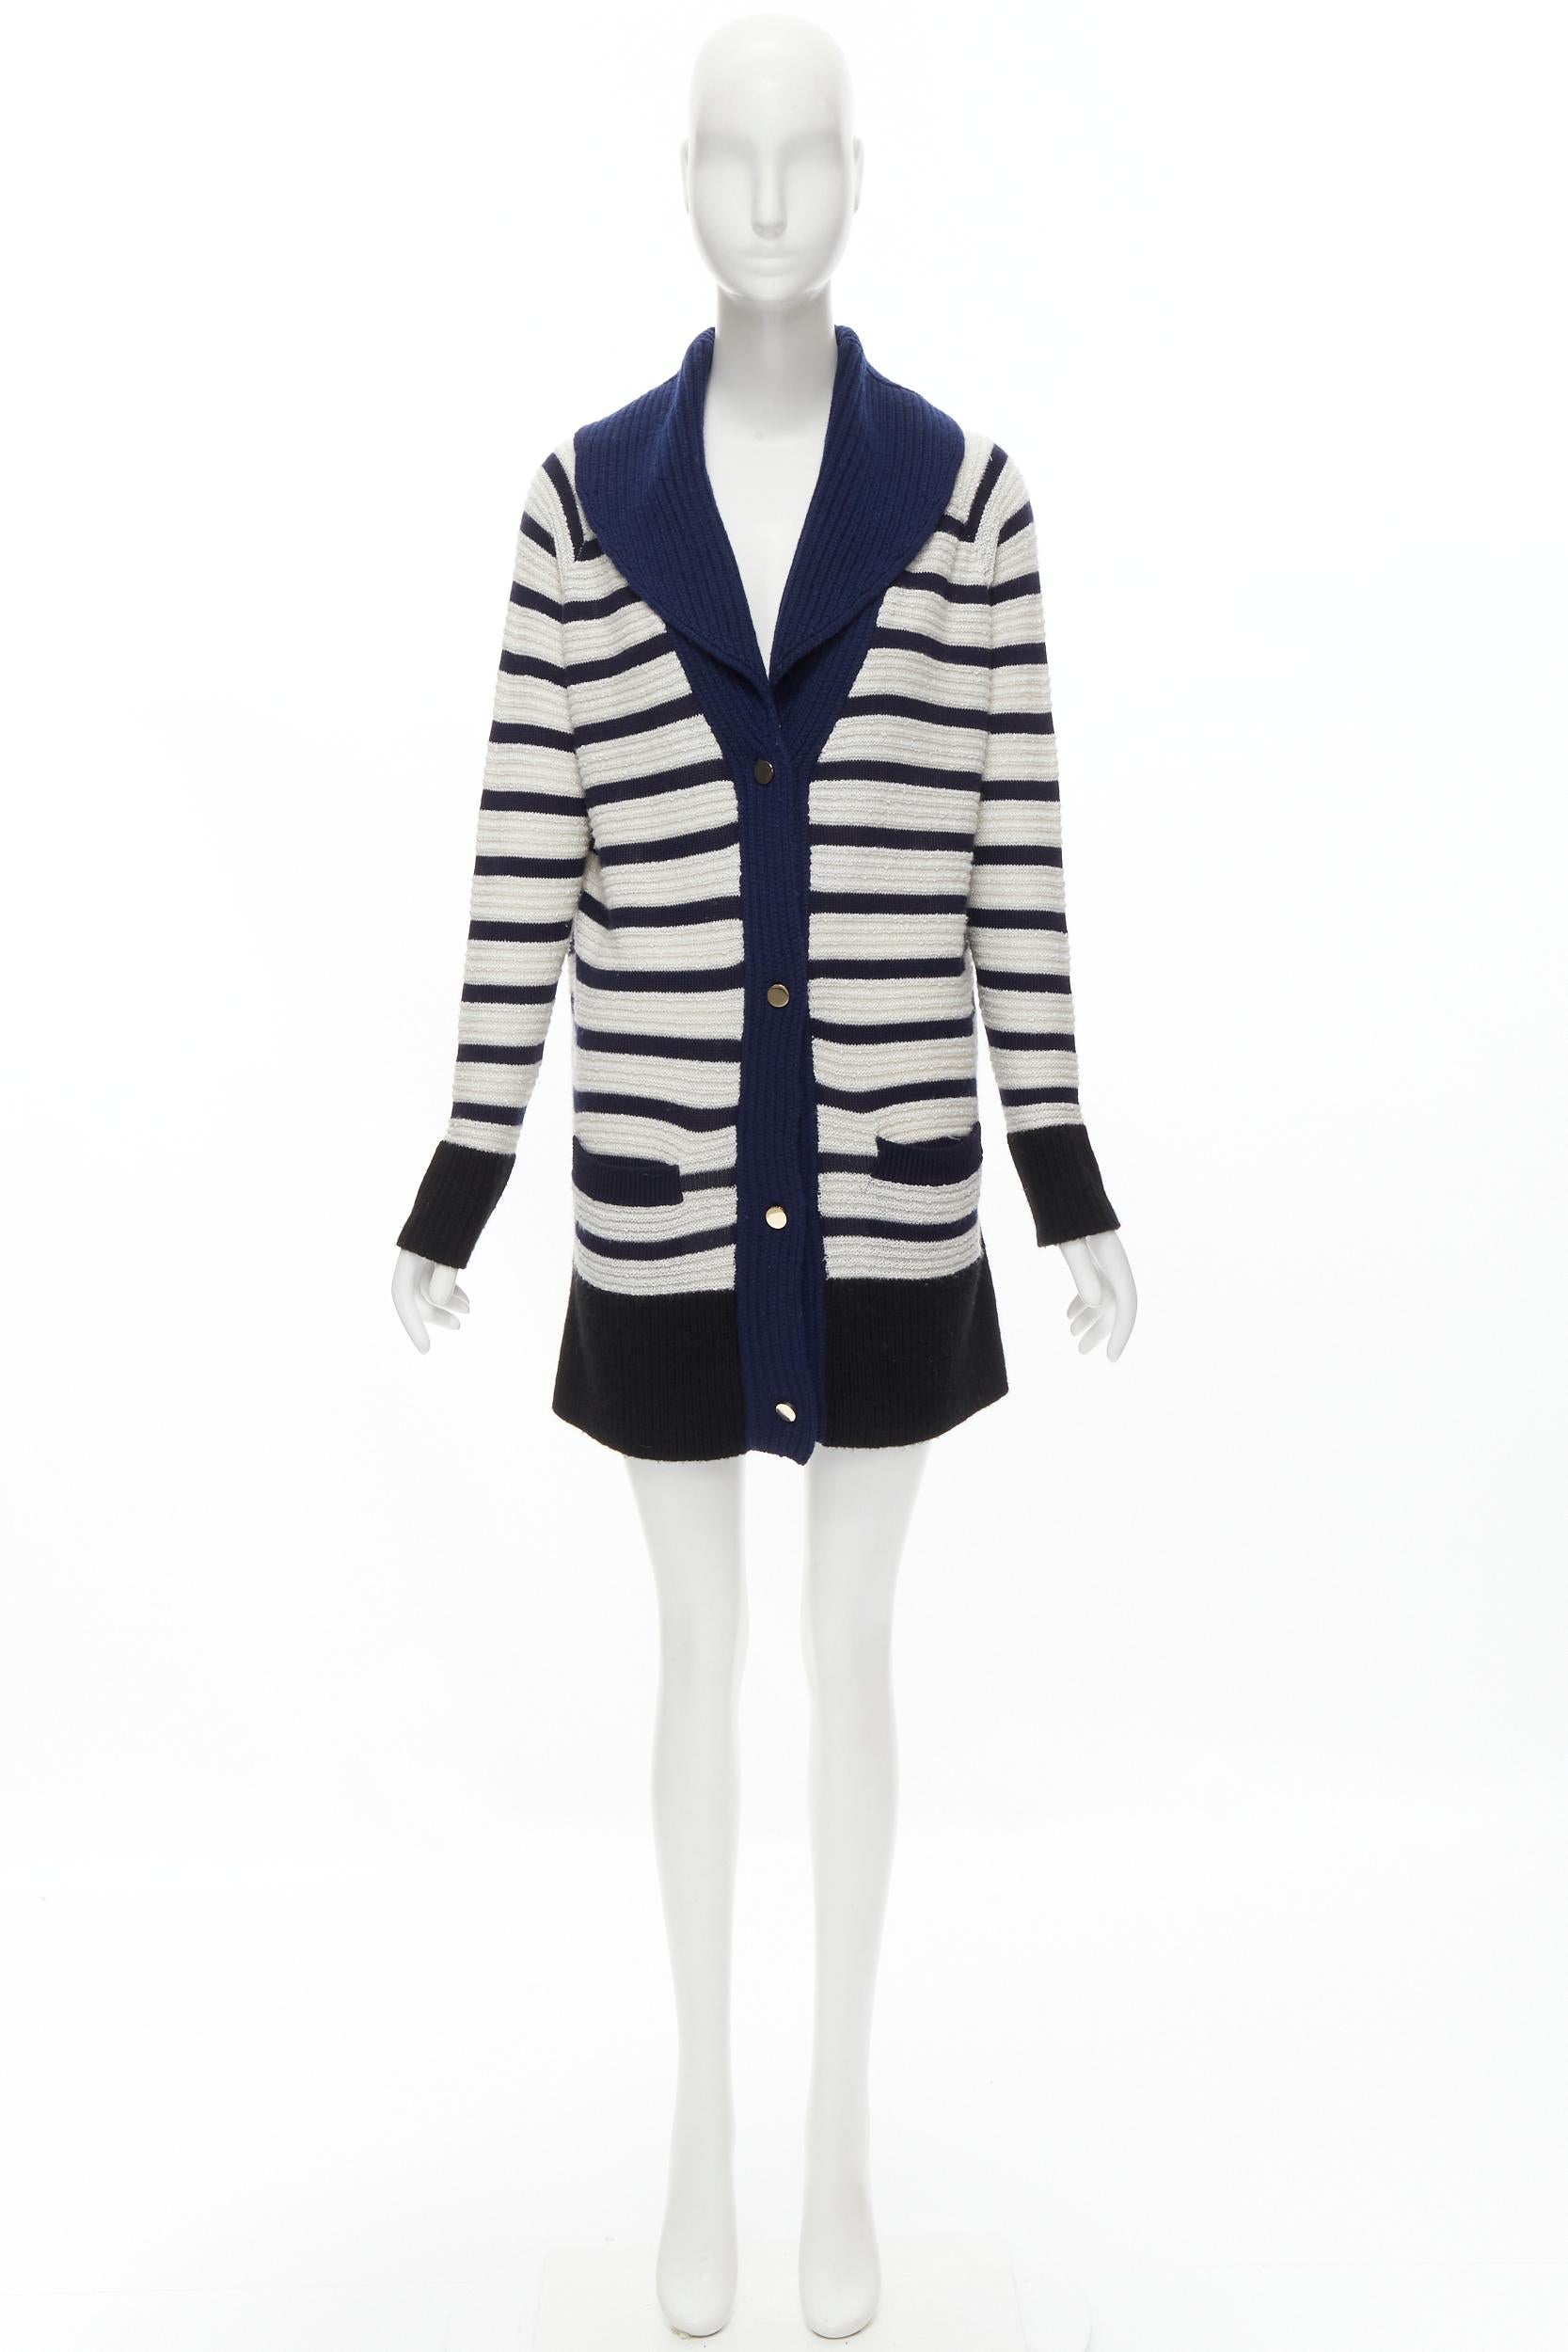 THE ROW blue white nautical striped gold button long chunky cardigan coat M 2